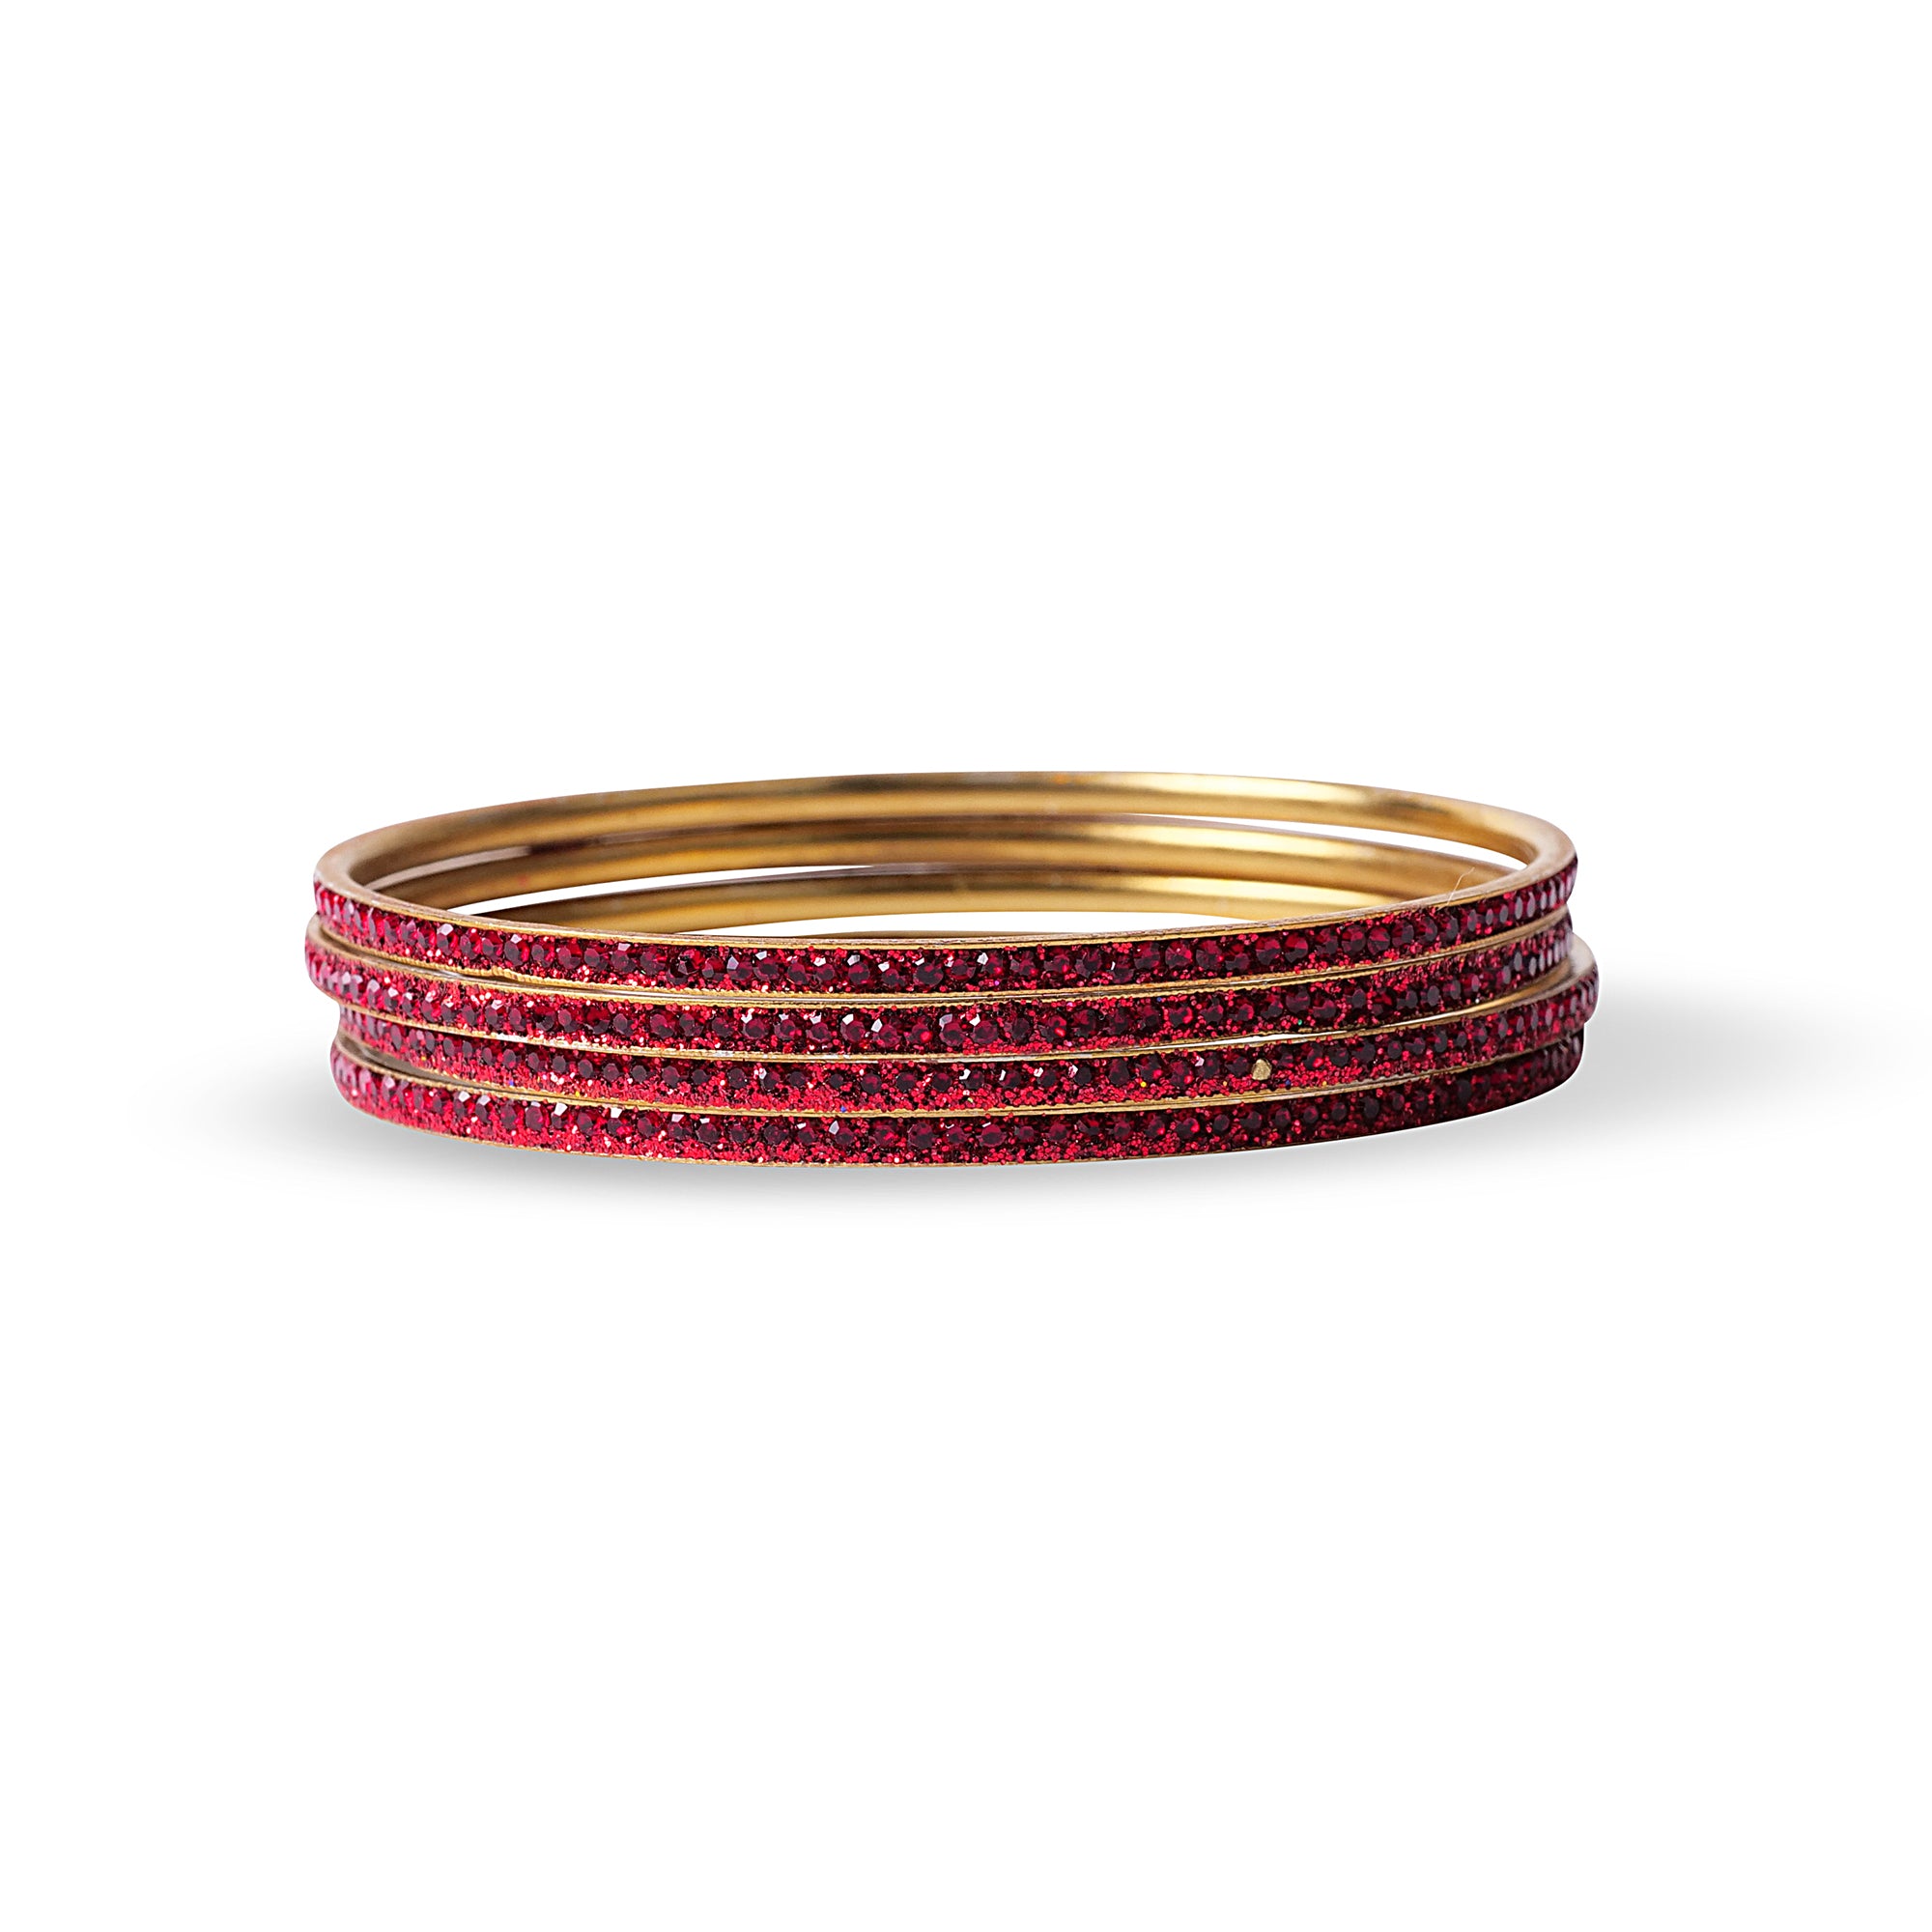 Glimmer Lakh Bangles in Maroon